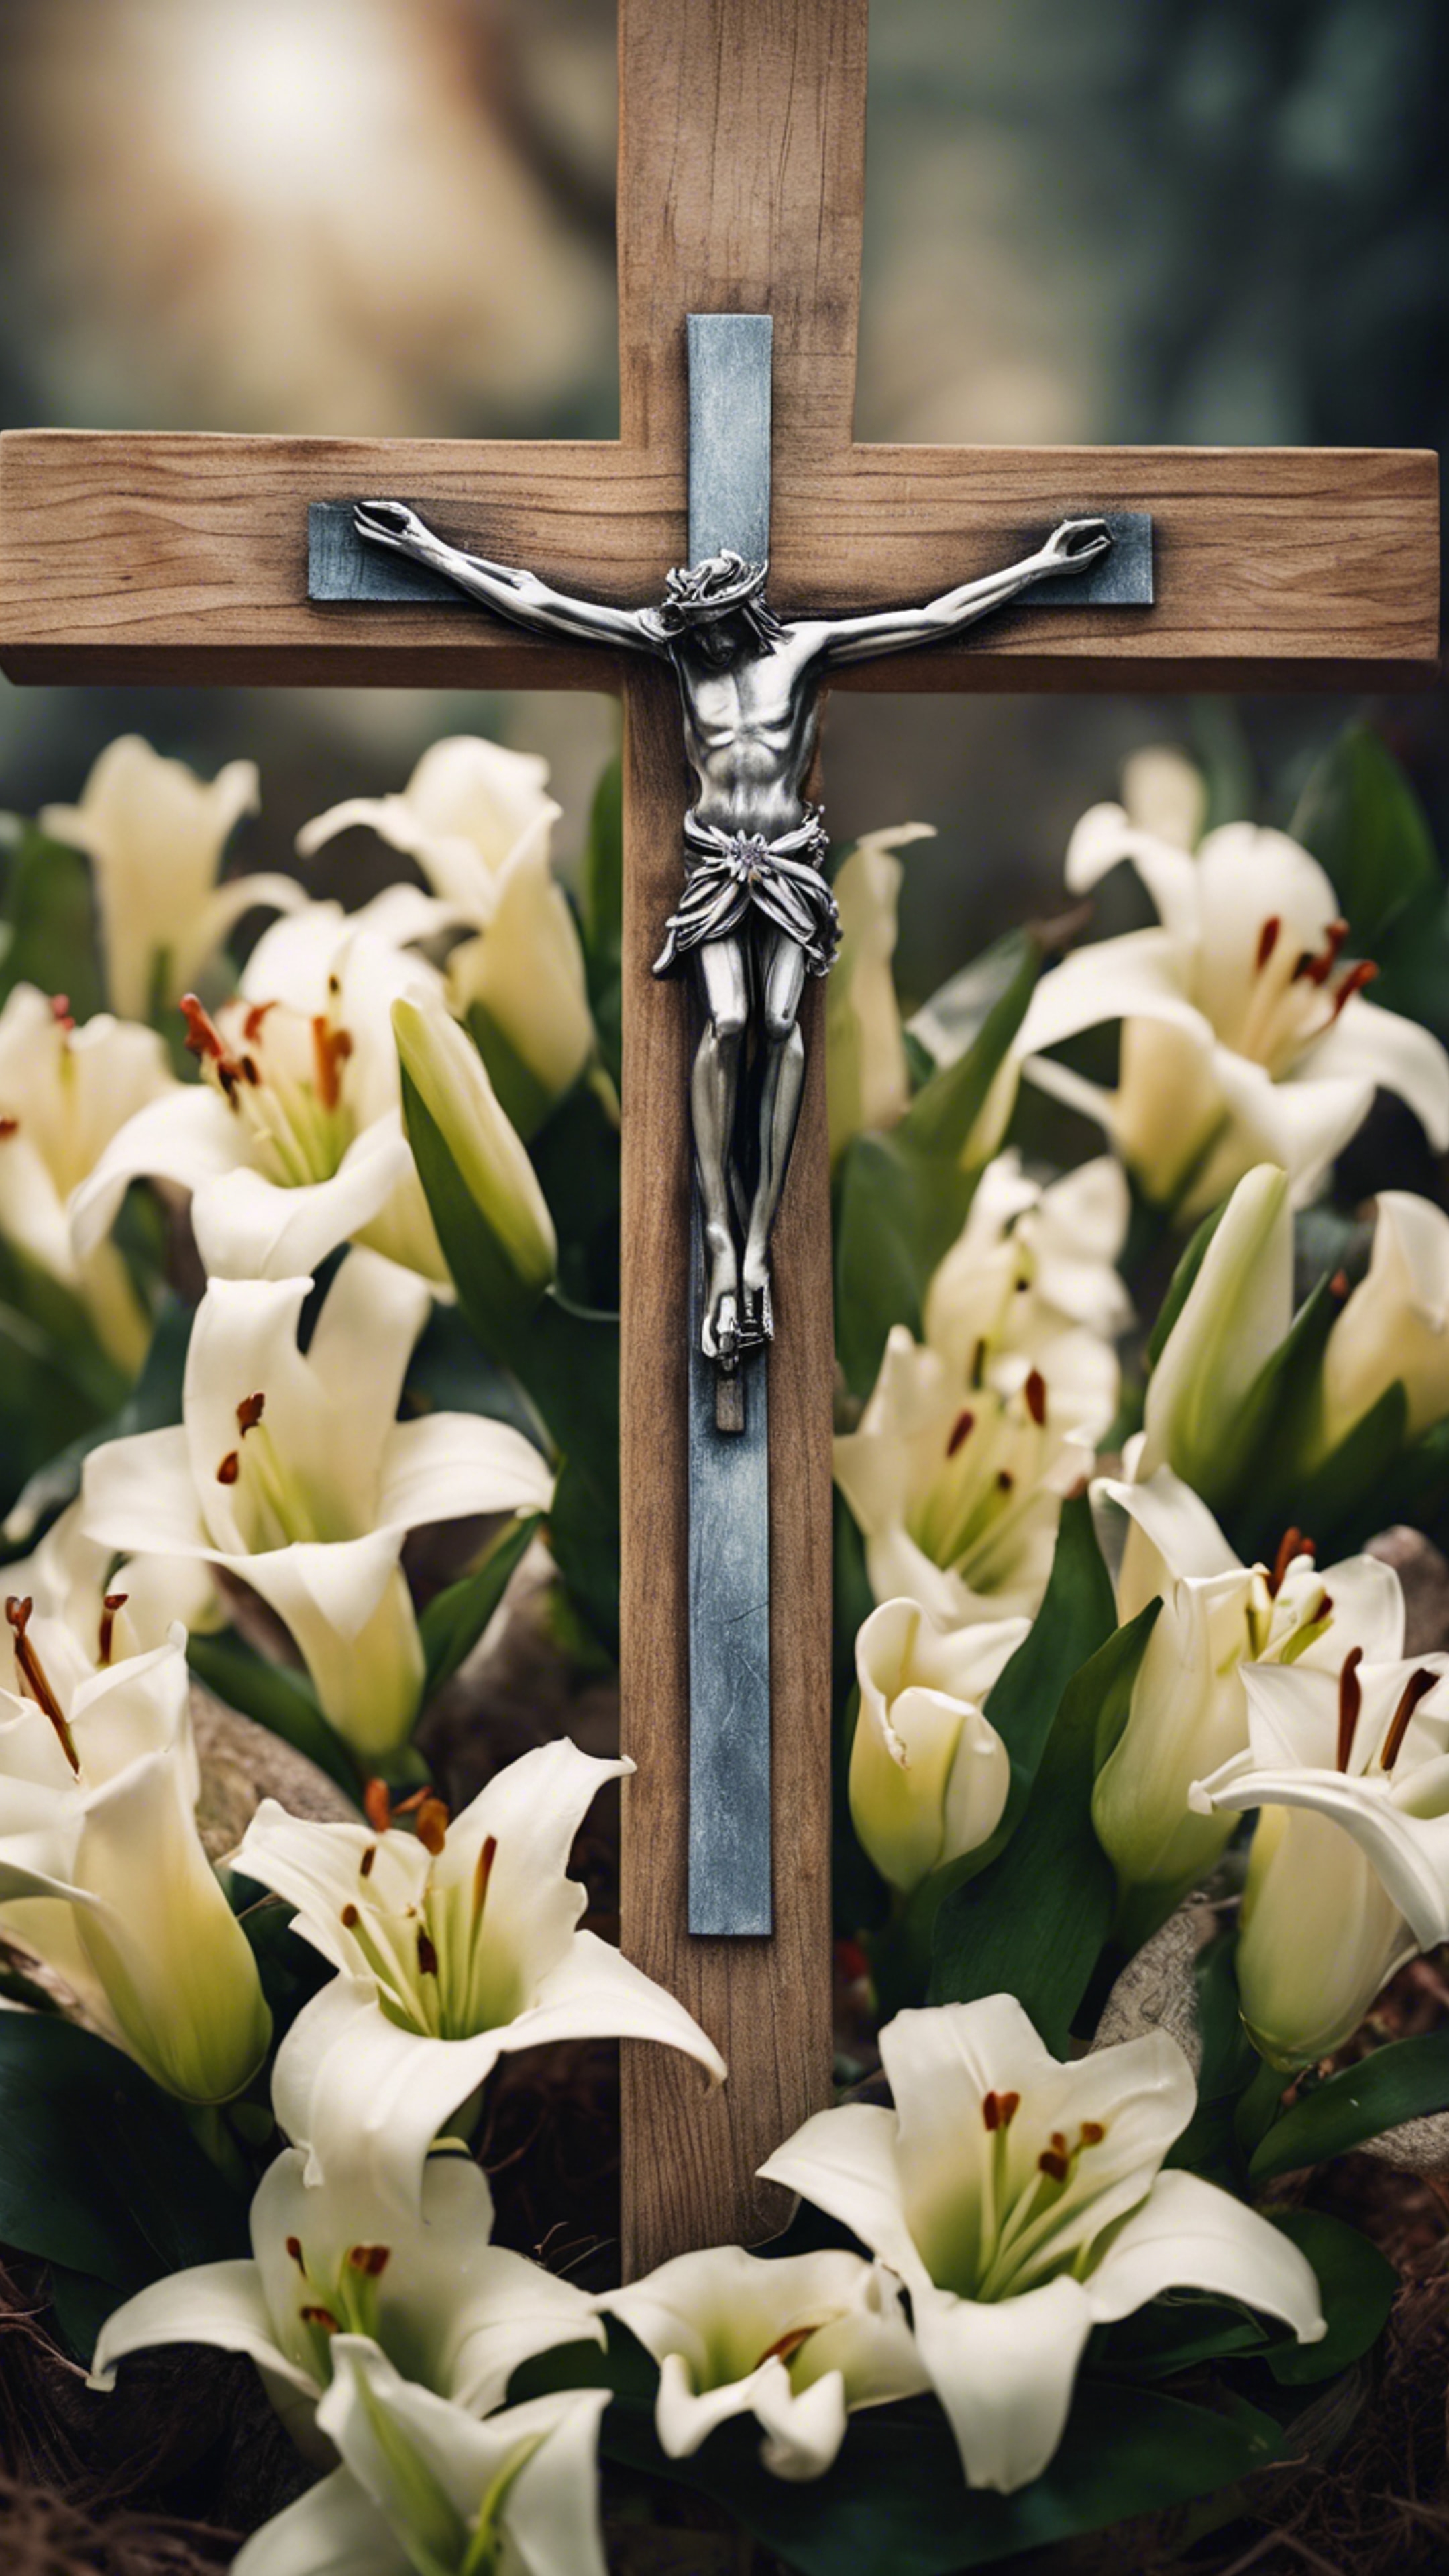 A simple wooden cross holding a crown of thorns, nestled amongst an array of blooming Easter lilies. Wallpaper[540a2c80d21742b6ad6b]